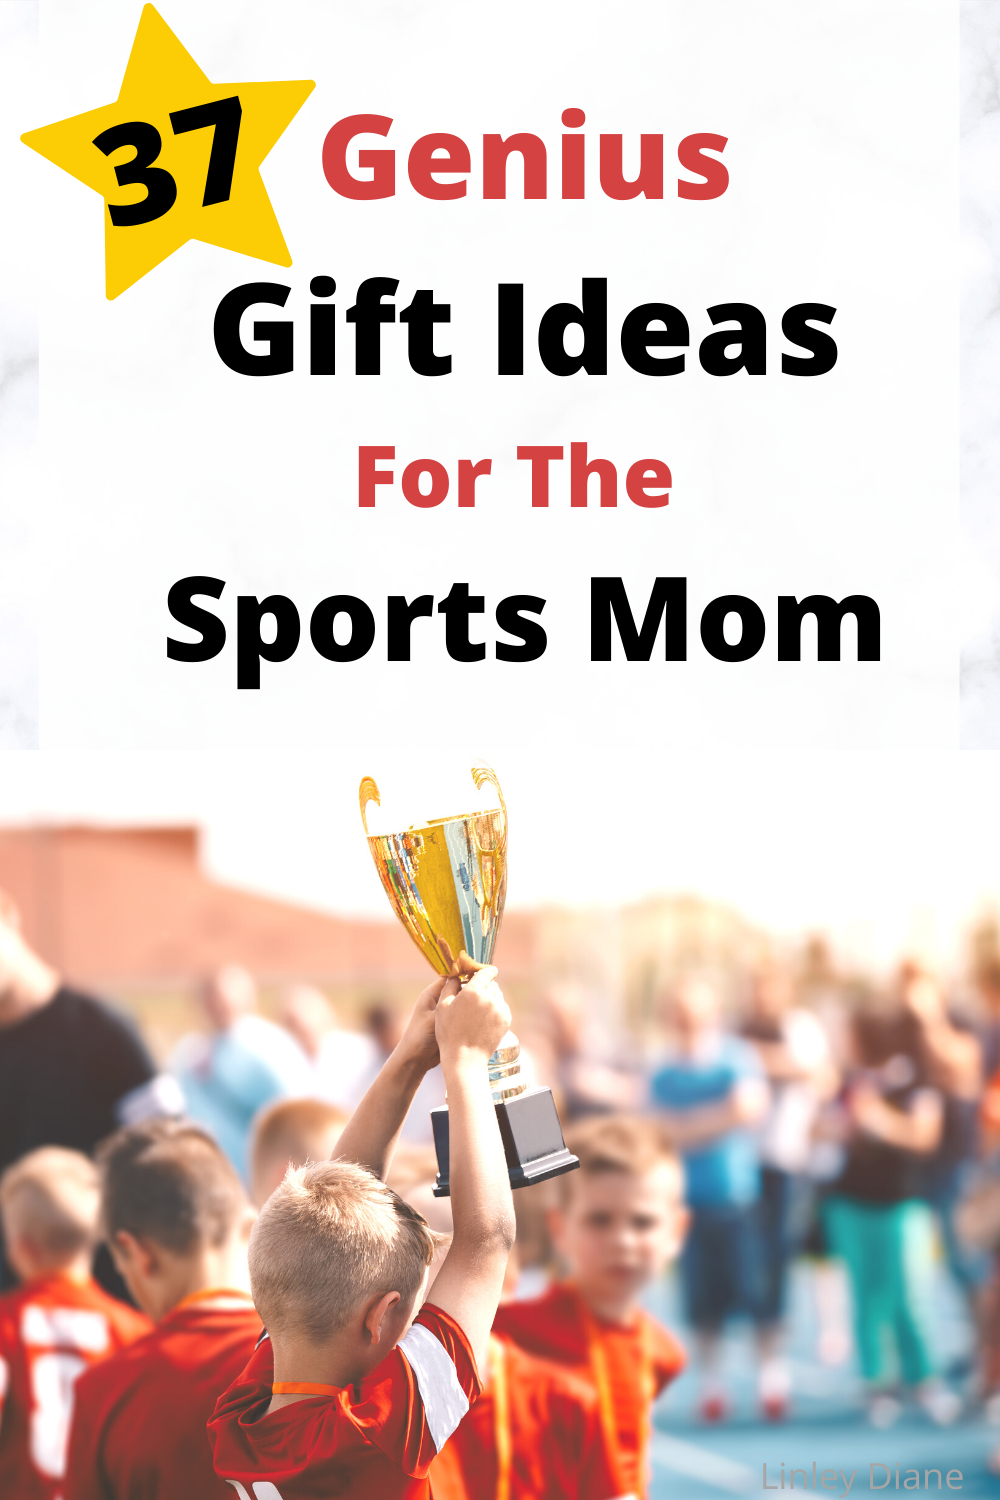 Gift Ideas for Sports Moms ⋆ Sugar, Spice and Glitter